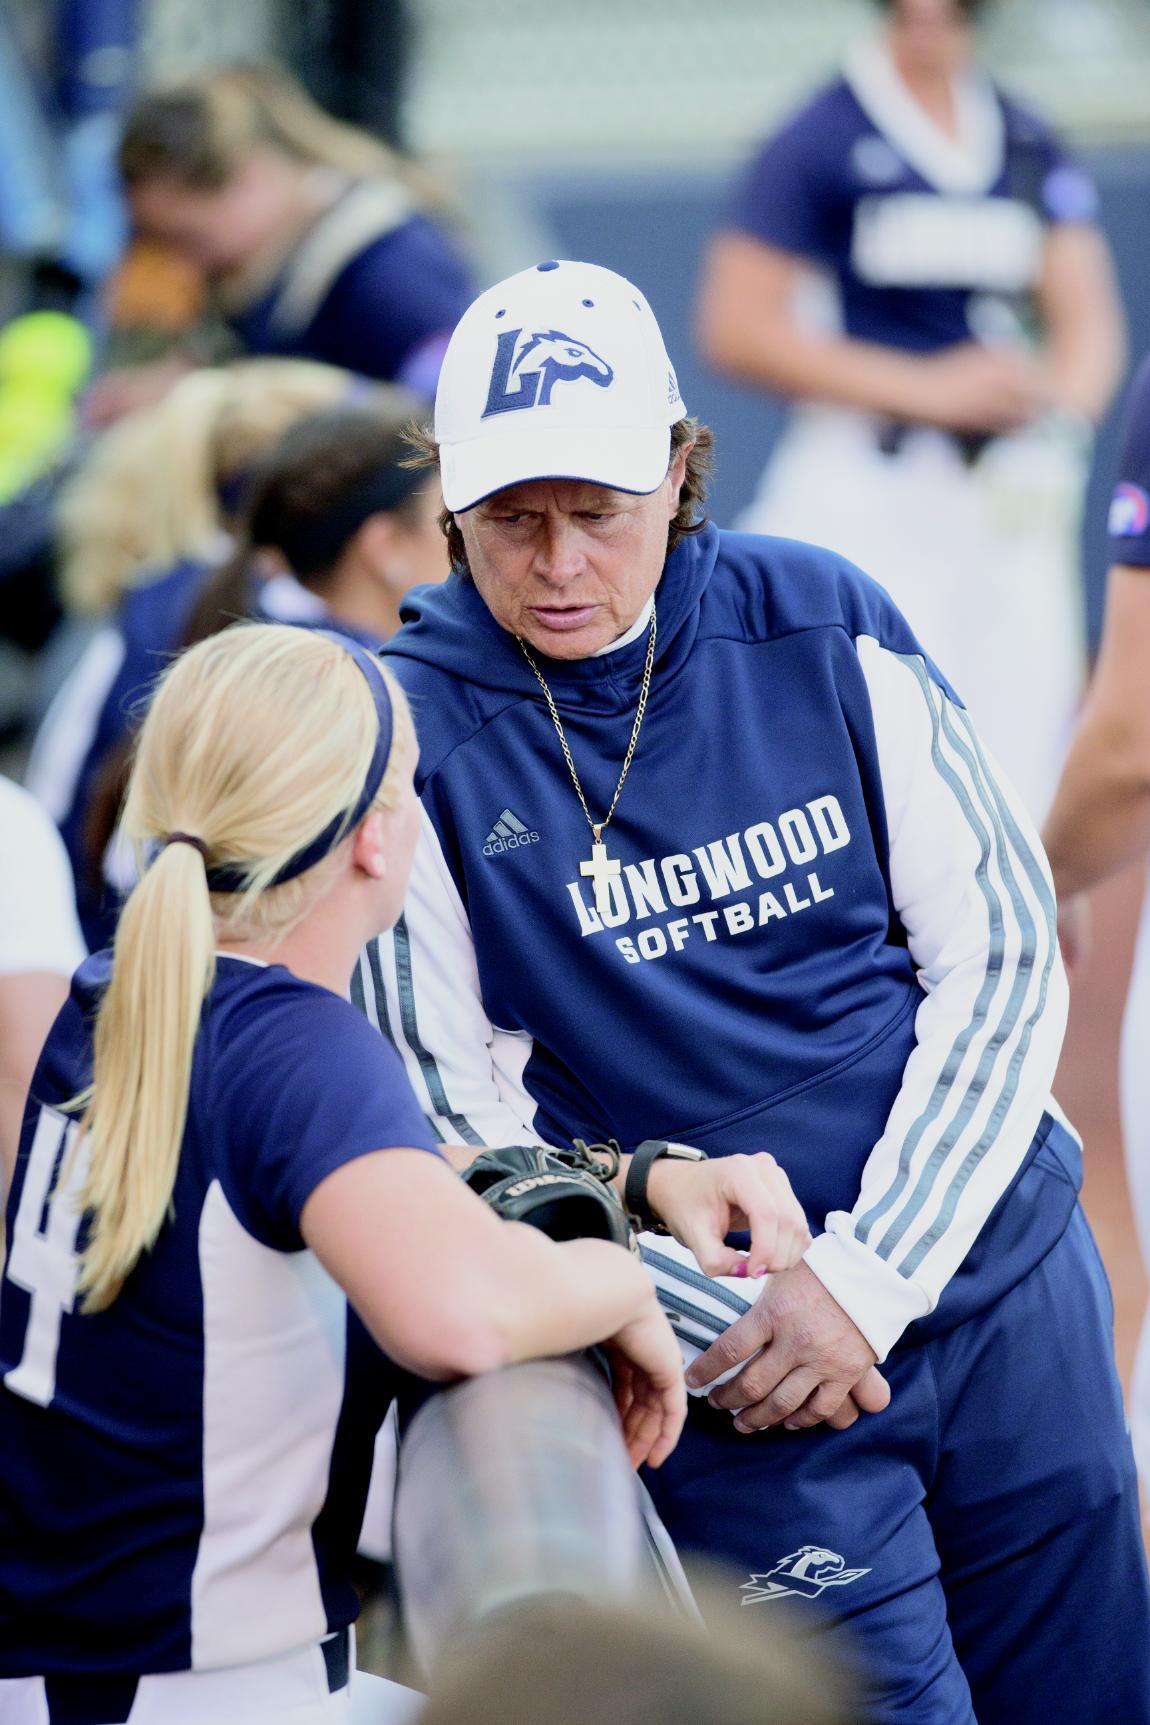 Now in her 21st year as head softball coach, Kathy Riley and her team are in pursuit of their fifth Big South Championship title. Photo credit: Mike Kropf ’14